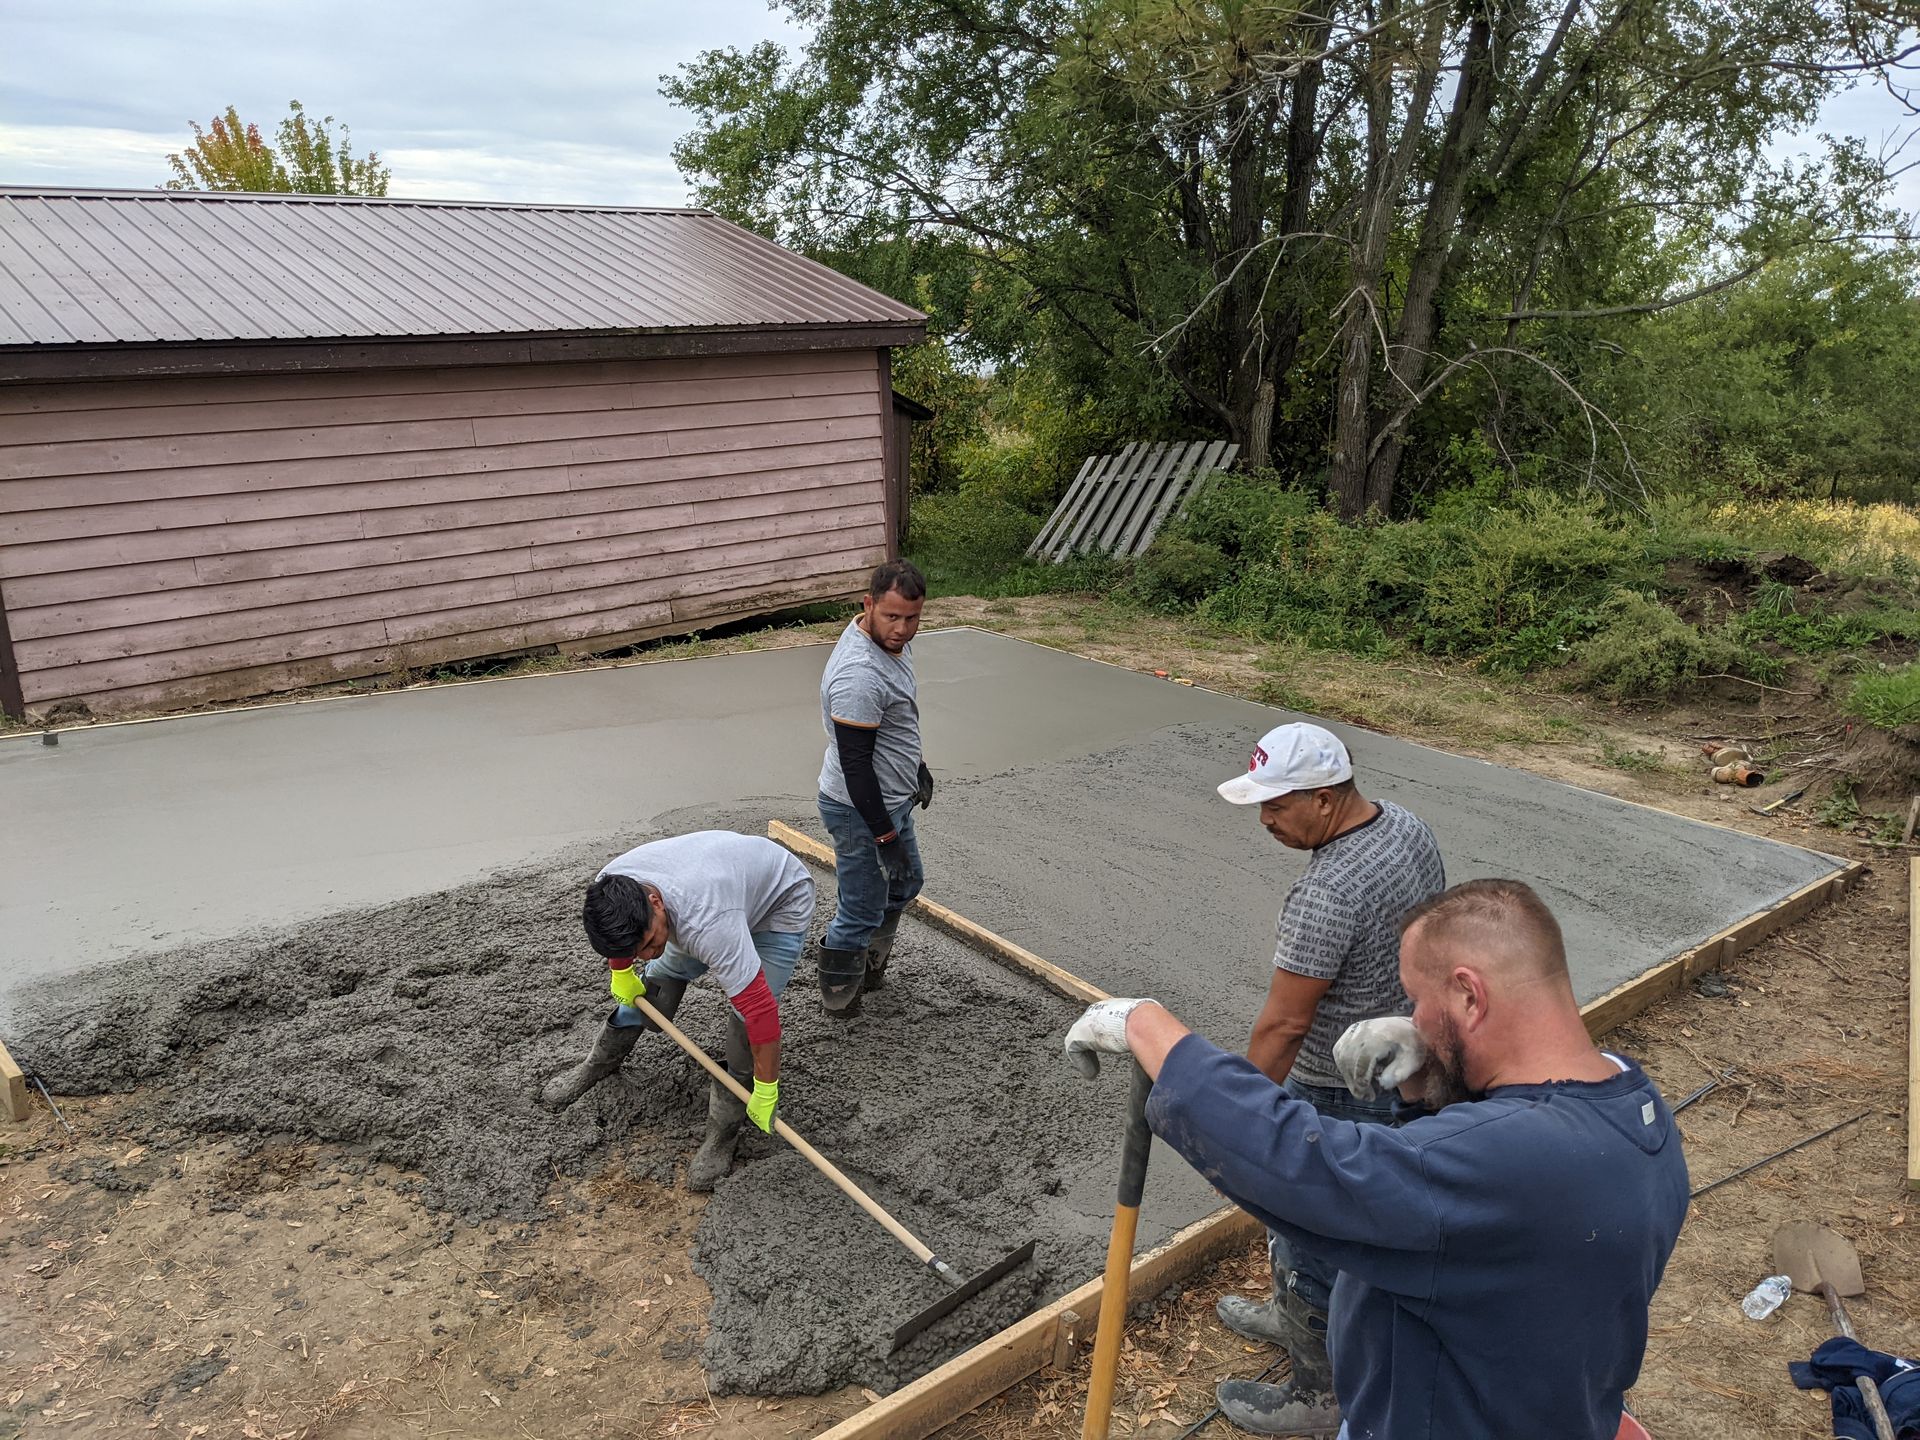 A group of men are working on a concrete driveway.